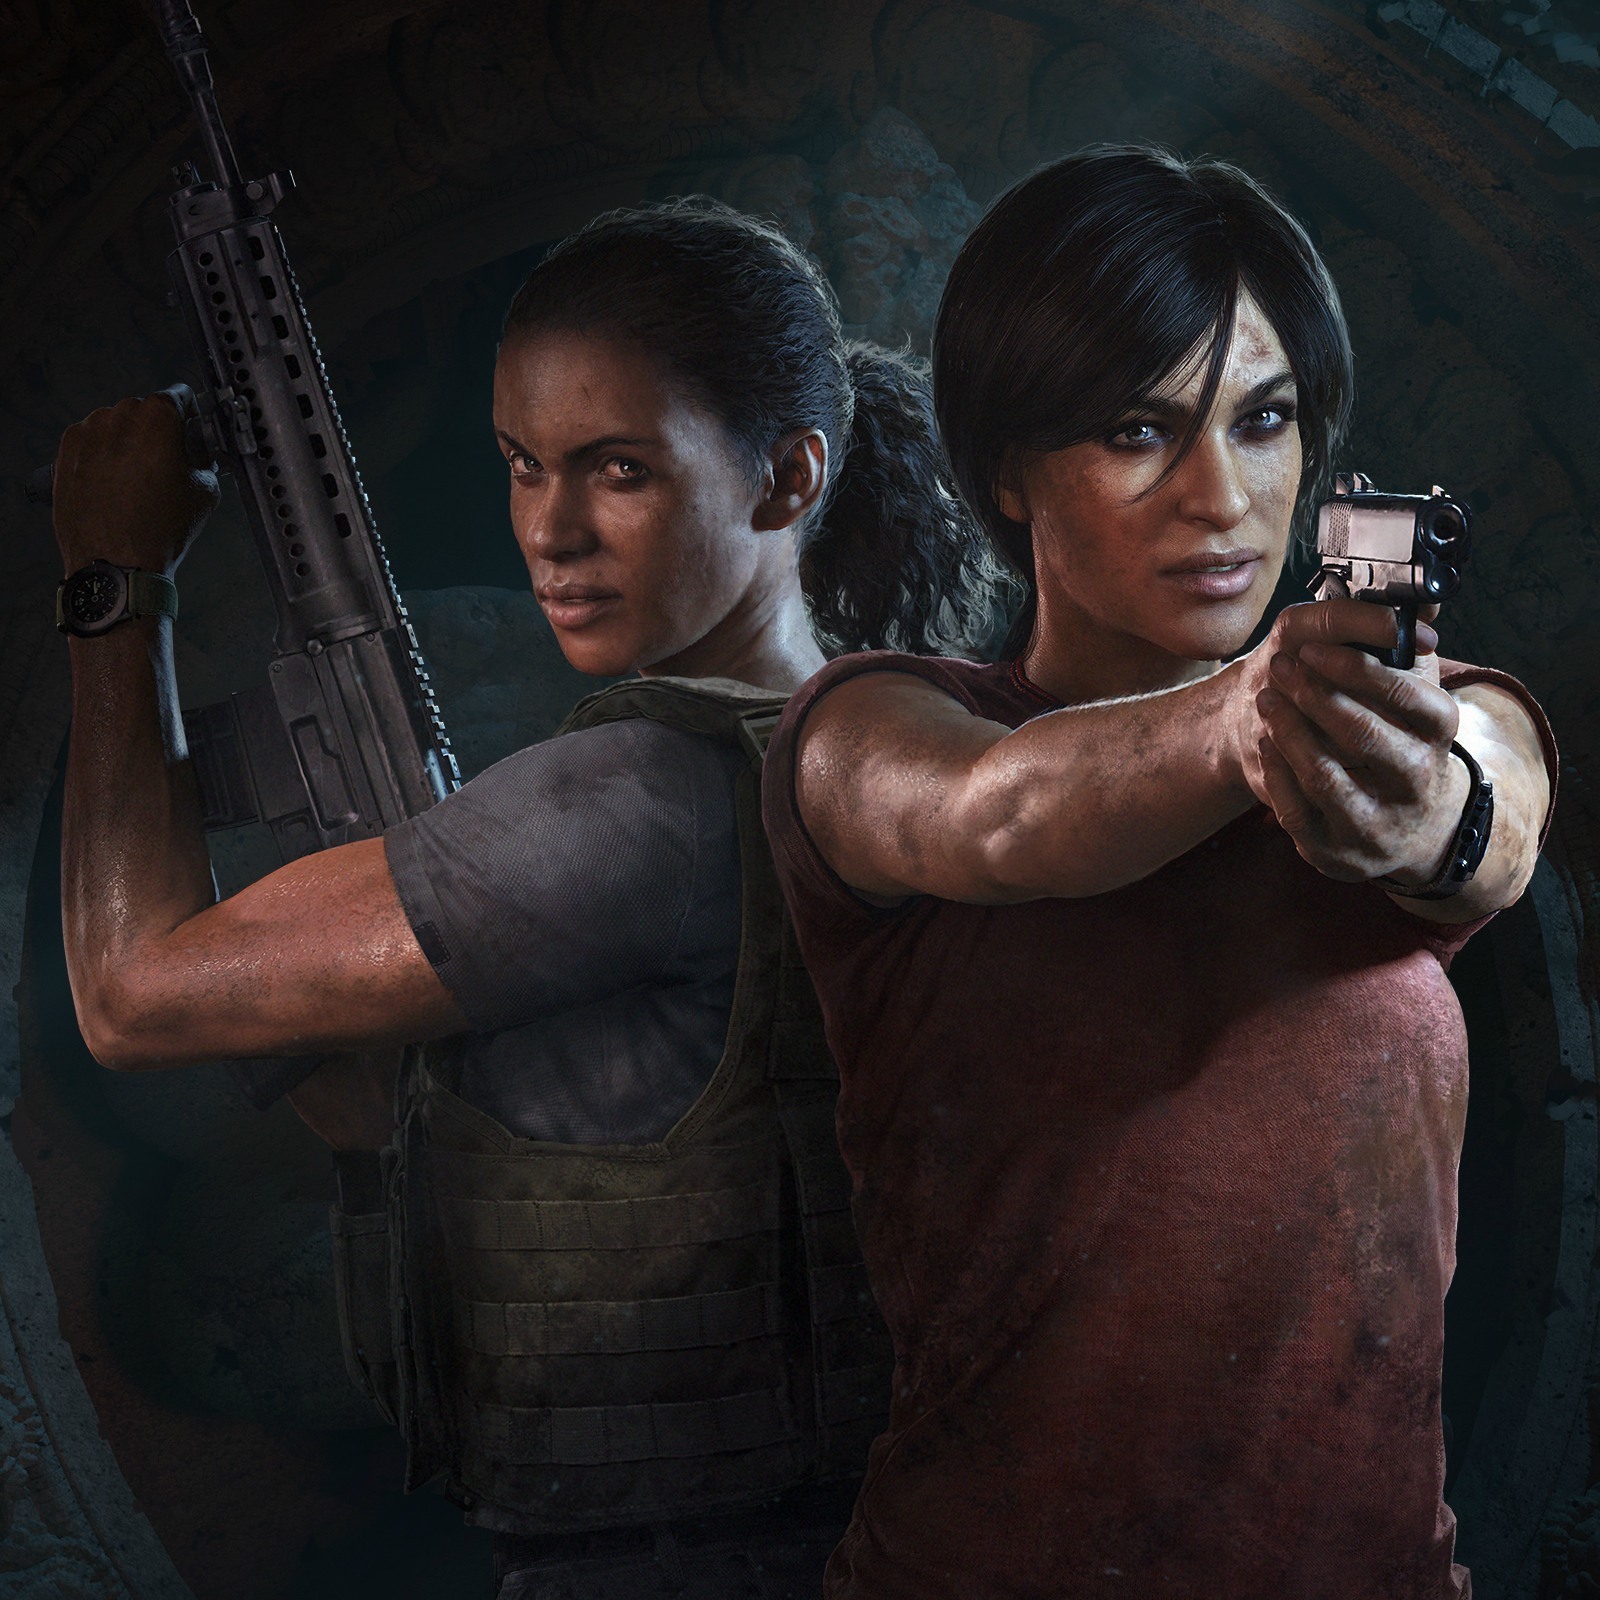 Led by fan-favorite character, Chloe Frazer, Uncharted: The Lost Legacy is an standalone chapter covering unseen aspects of the Uncharted saga. In order to recover a fabled ancient Indian artifact and keep it out of the hands of a ruthless war profiteer, Chloe Frazer must enlist the aid of renowned mercenary Nadine Ross. Together, they’ll venture deep into the mountains of India in search of the legendary artifact. Along the way, they’ll learn to work together to unearth the mystery of the artifact, fight their way through fierce opposition, and prevent the region from falling into chaos.